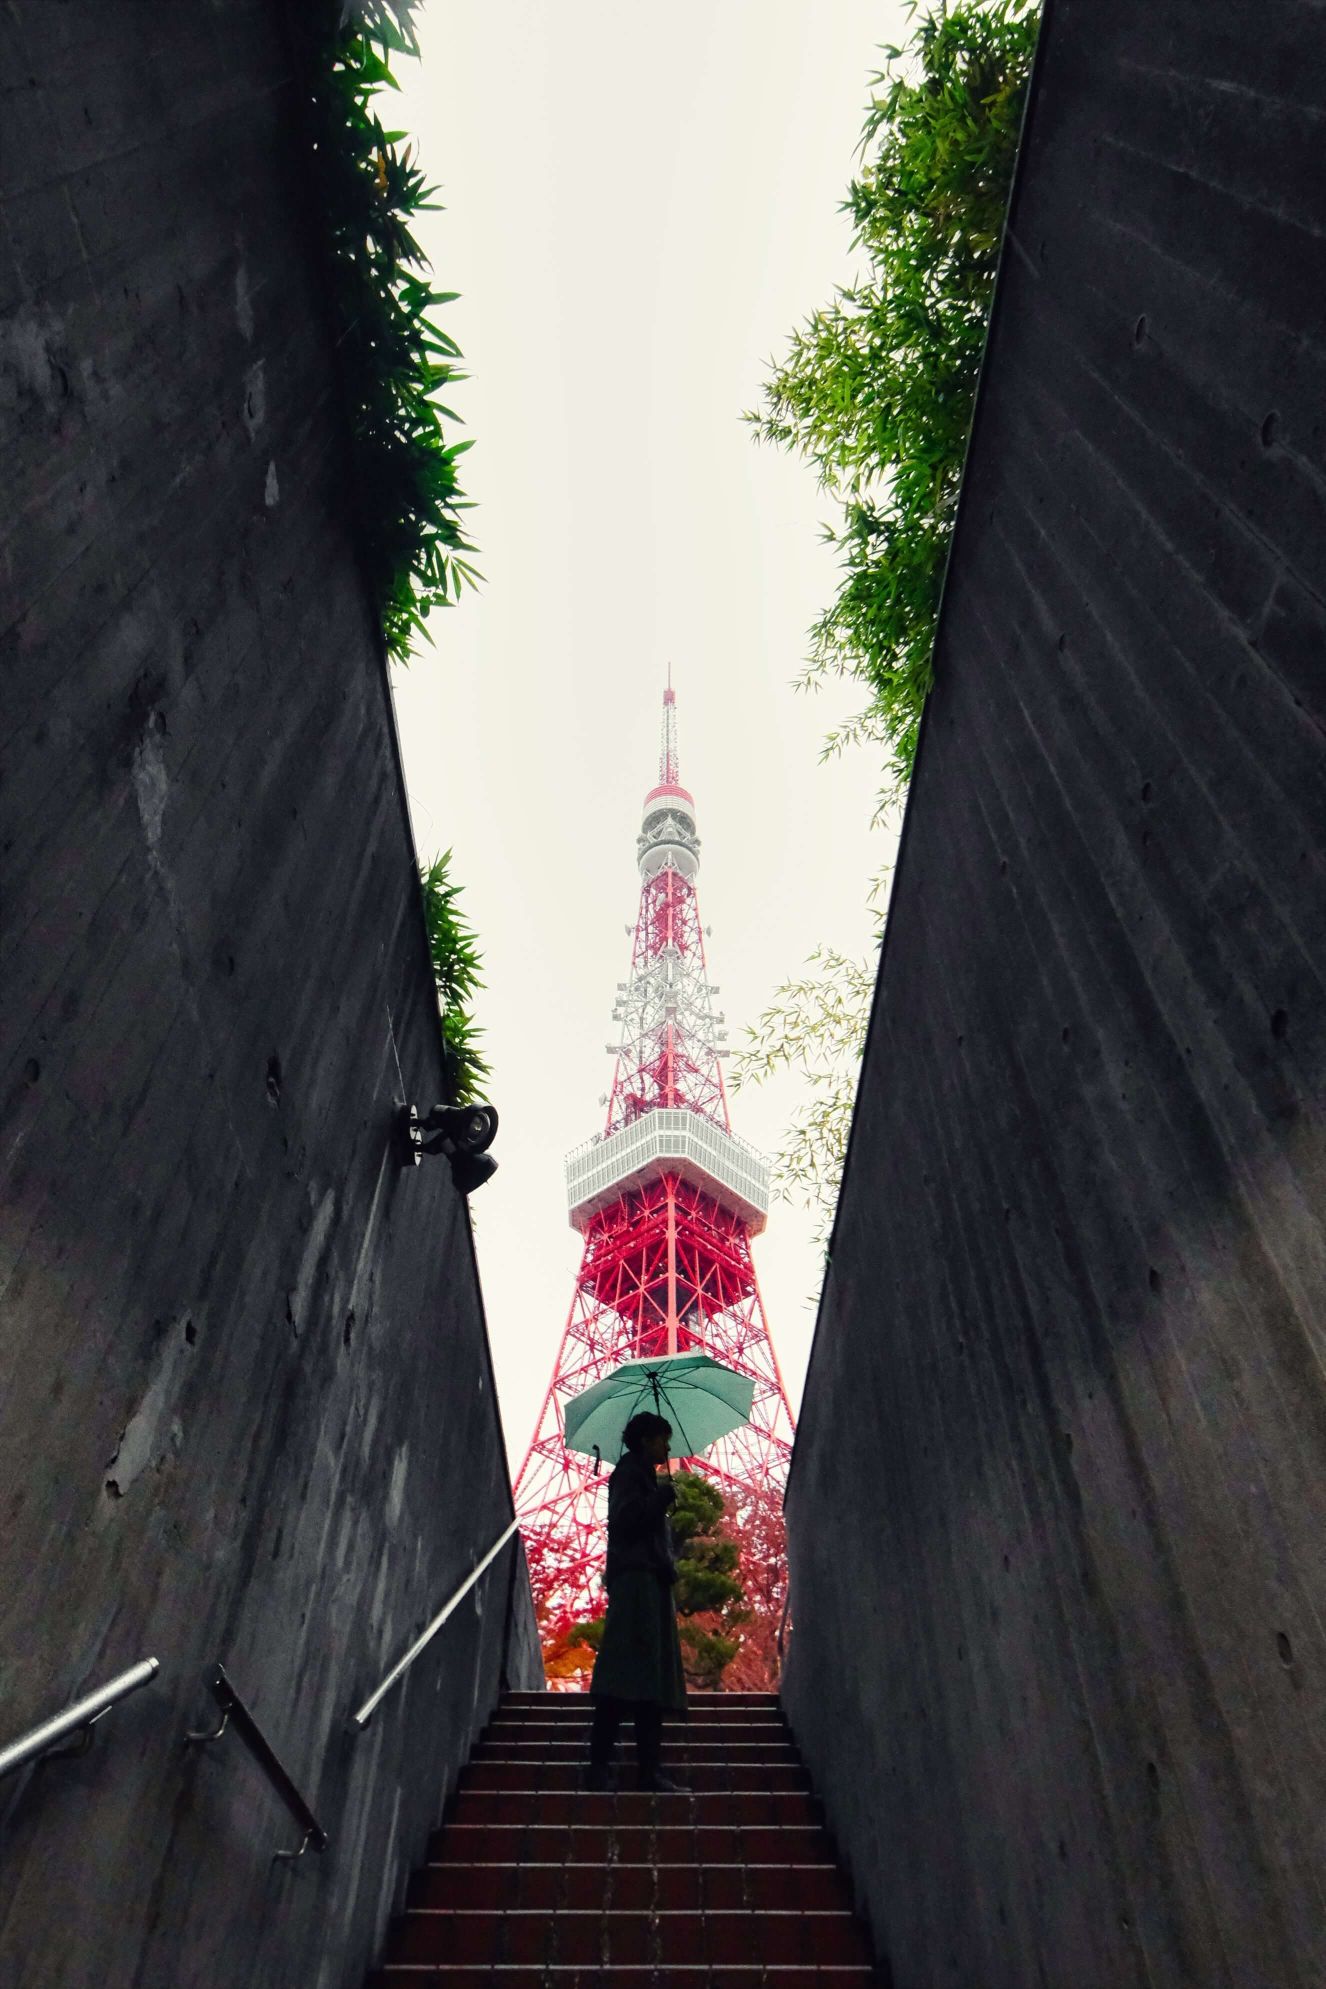 This picture was taken on a raining day, but the color of the umbrella balances the red of Tokyo Tower. Together, the reds and the green make up this picture.